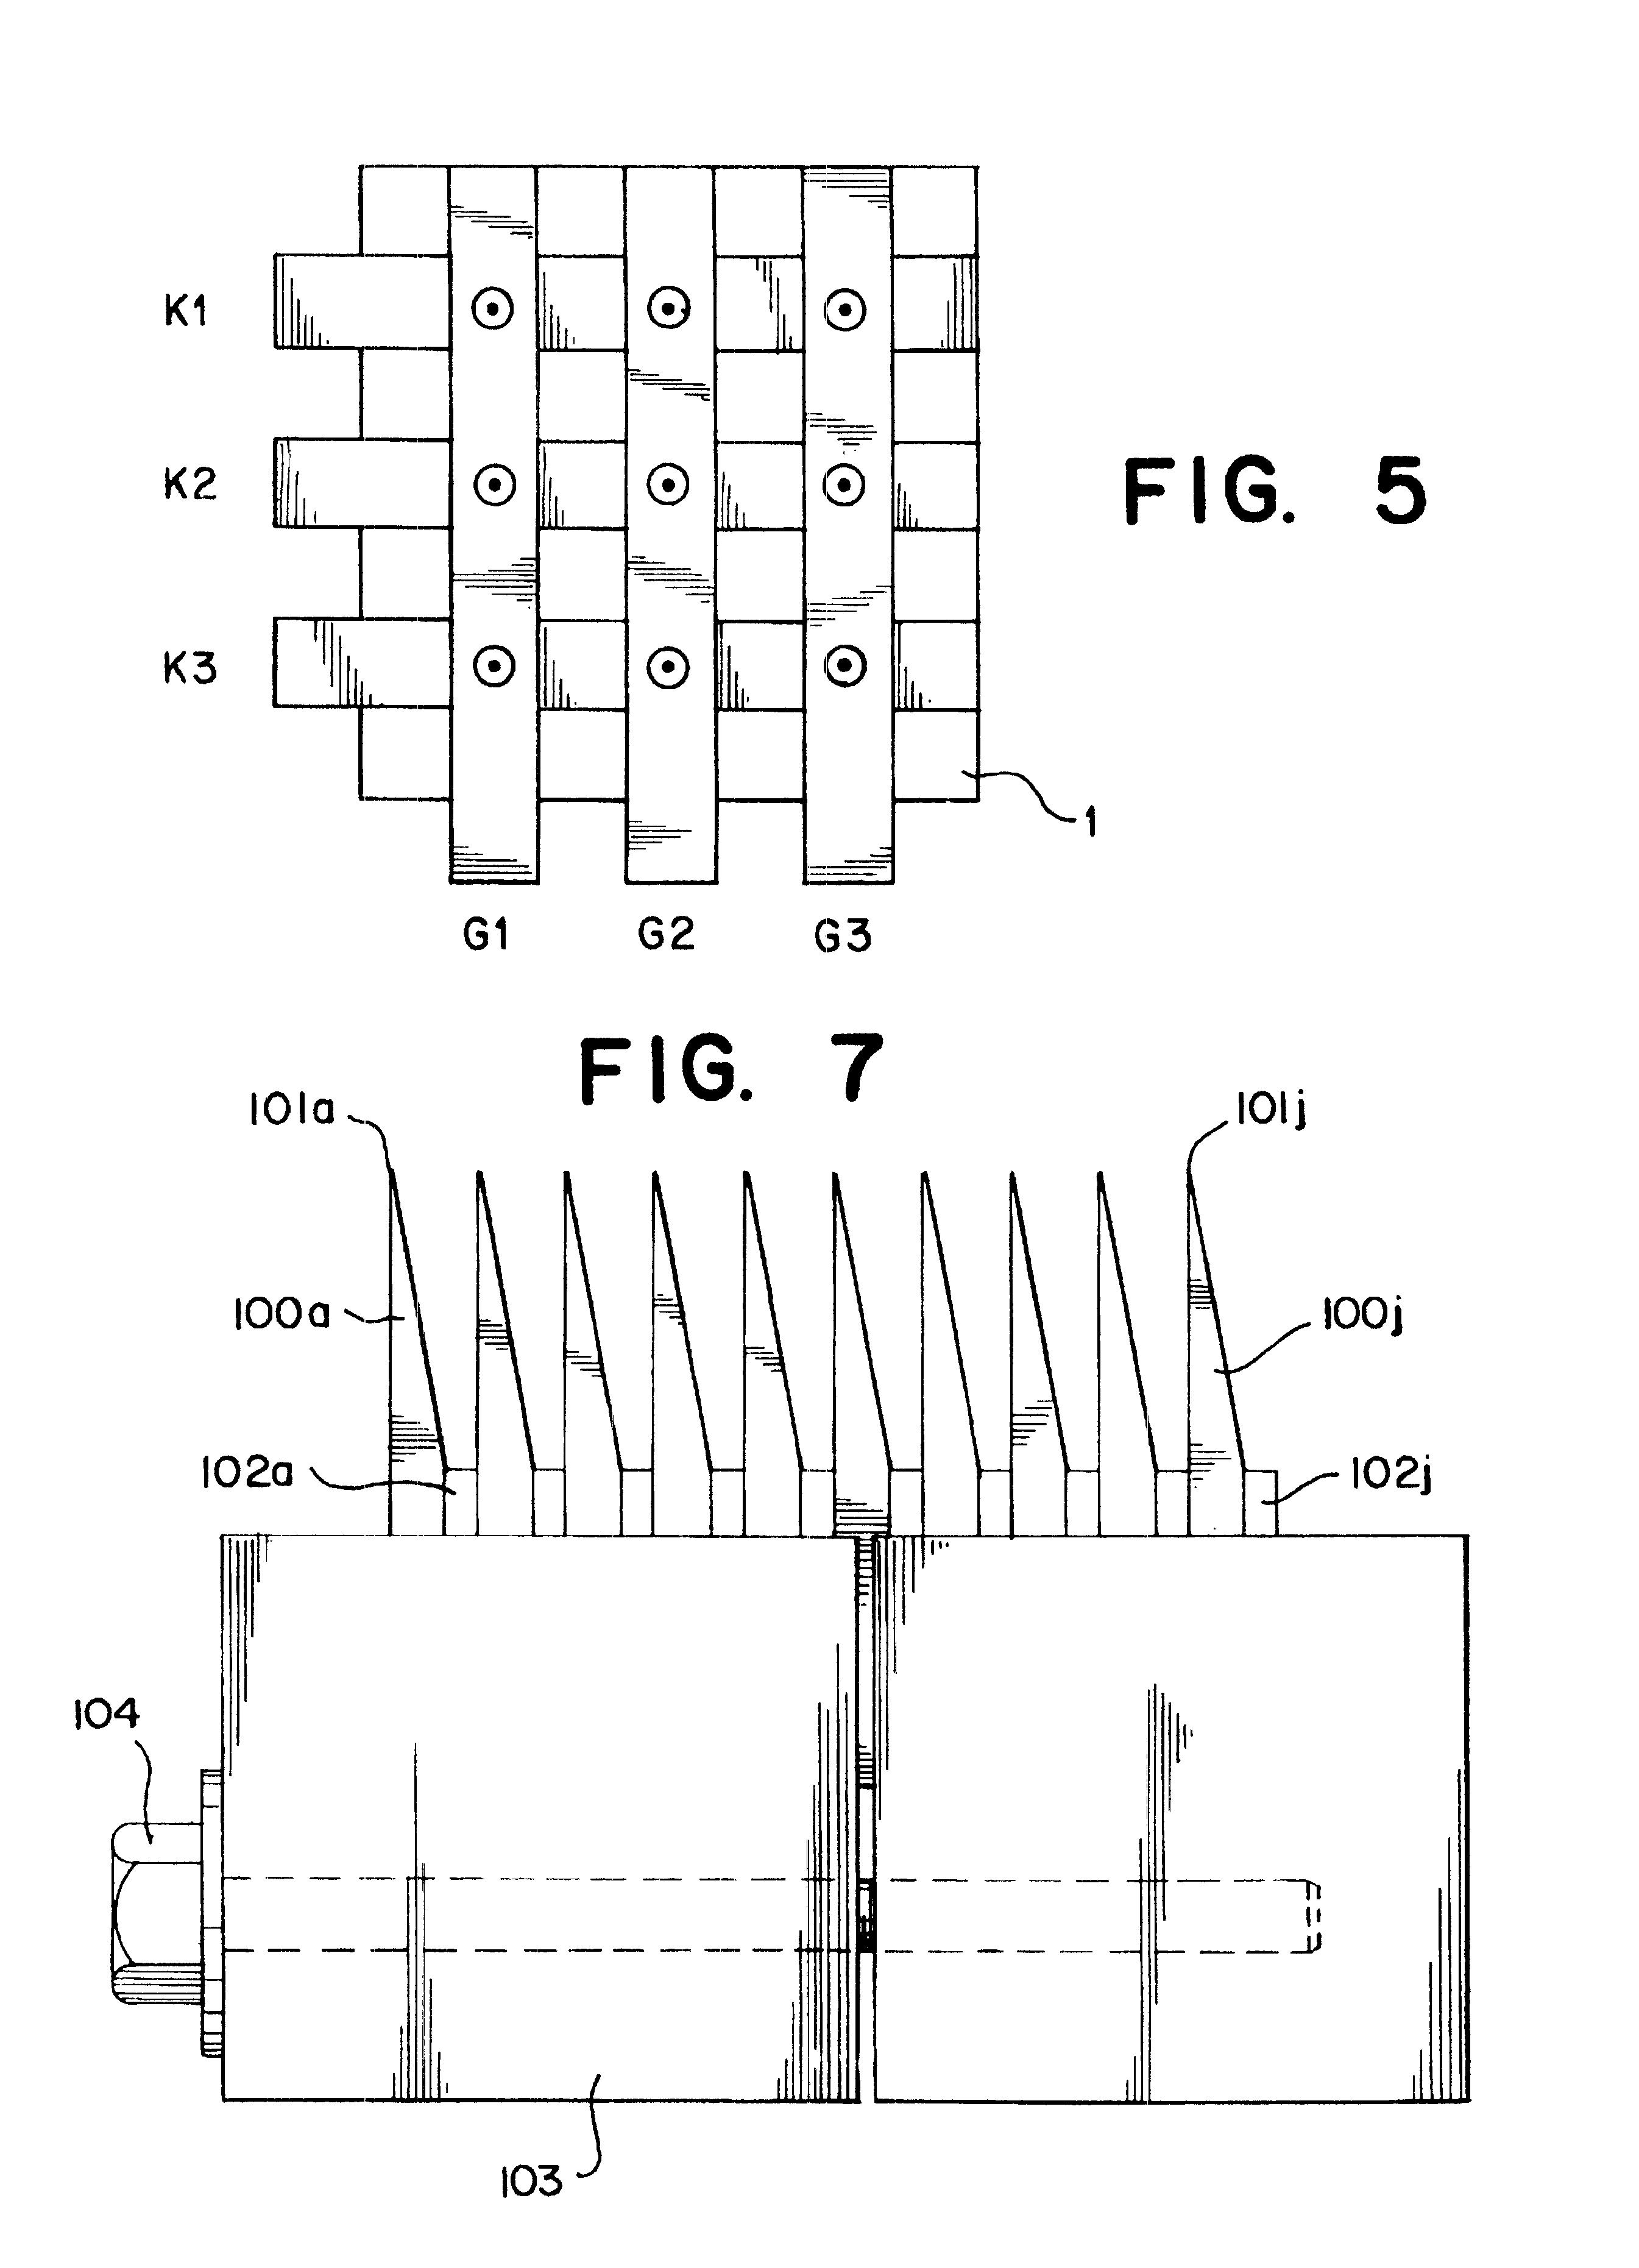 Field emission cathode having an electrically conducting material shaped of a narrow rod or knife edge